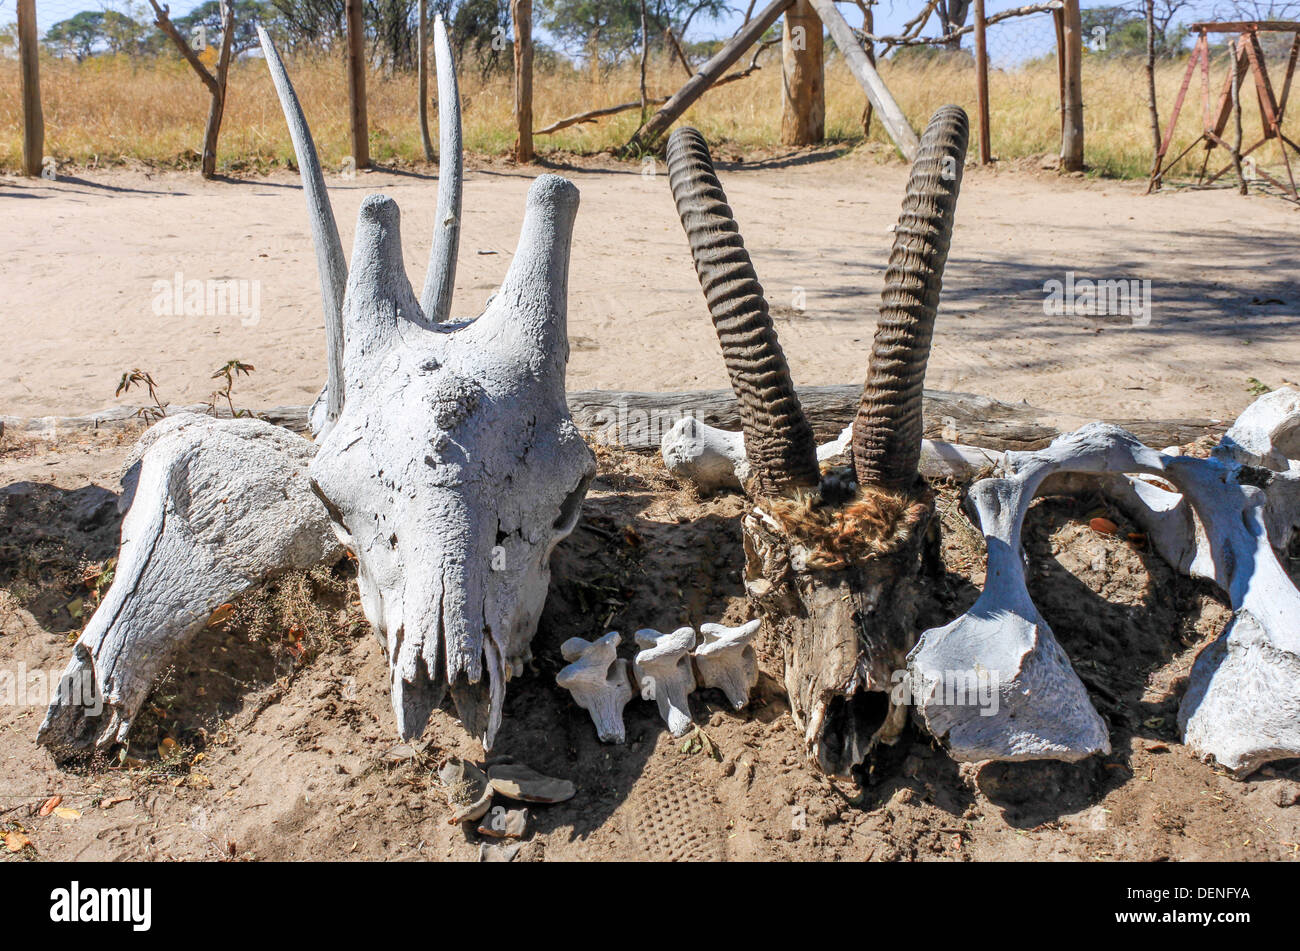 A photograph of some perished wild animals in Zimbabwe. These ones probably died of natural causes but are a symbol of poaching. Stock Photo